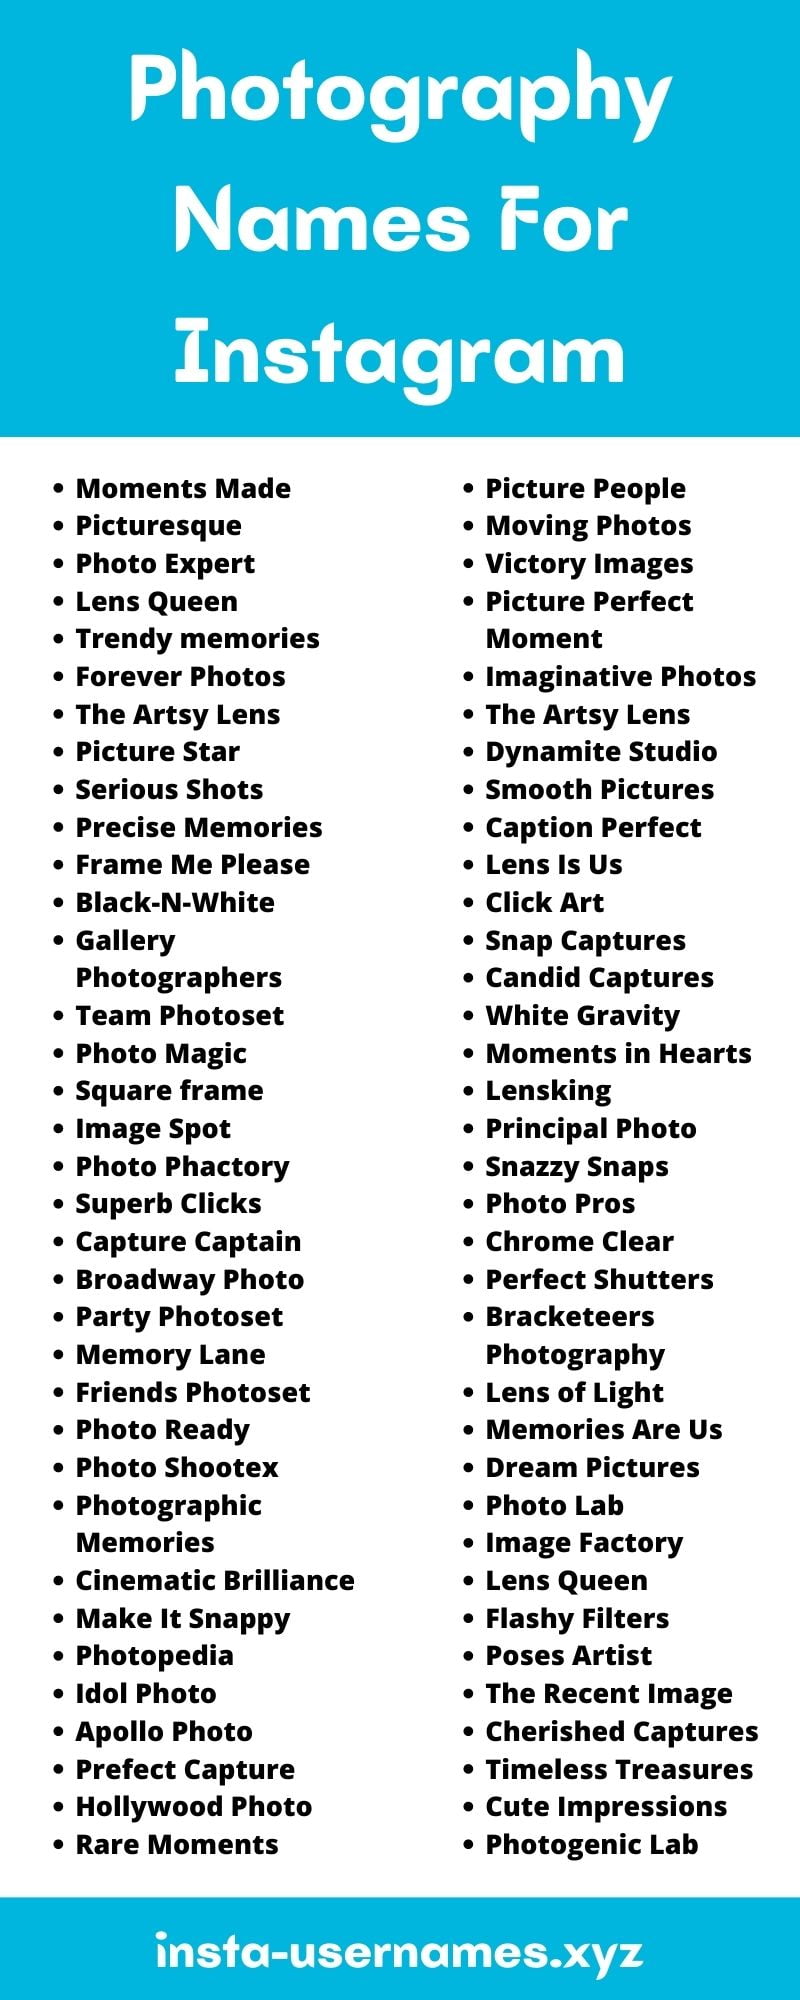 Photography Names Ideas For Instagram - Photography Names For Instagram [2021] Photography Usernames Ideas